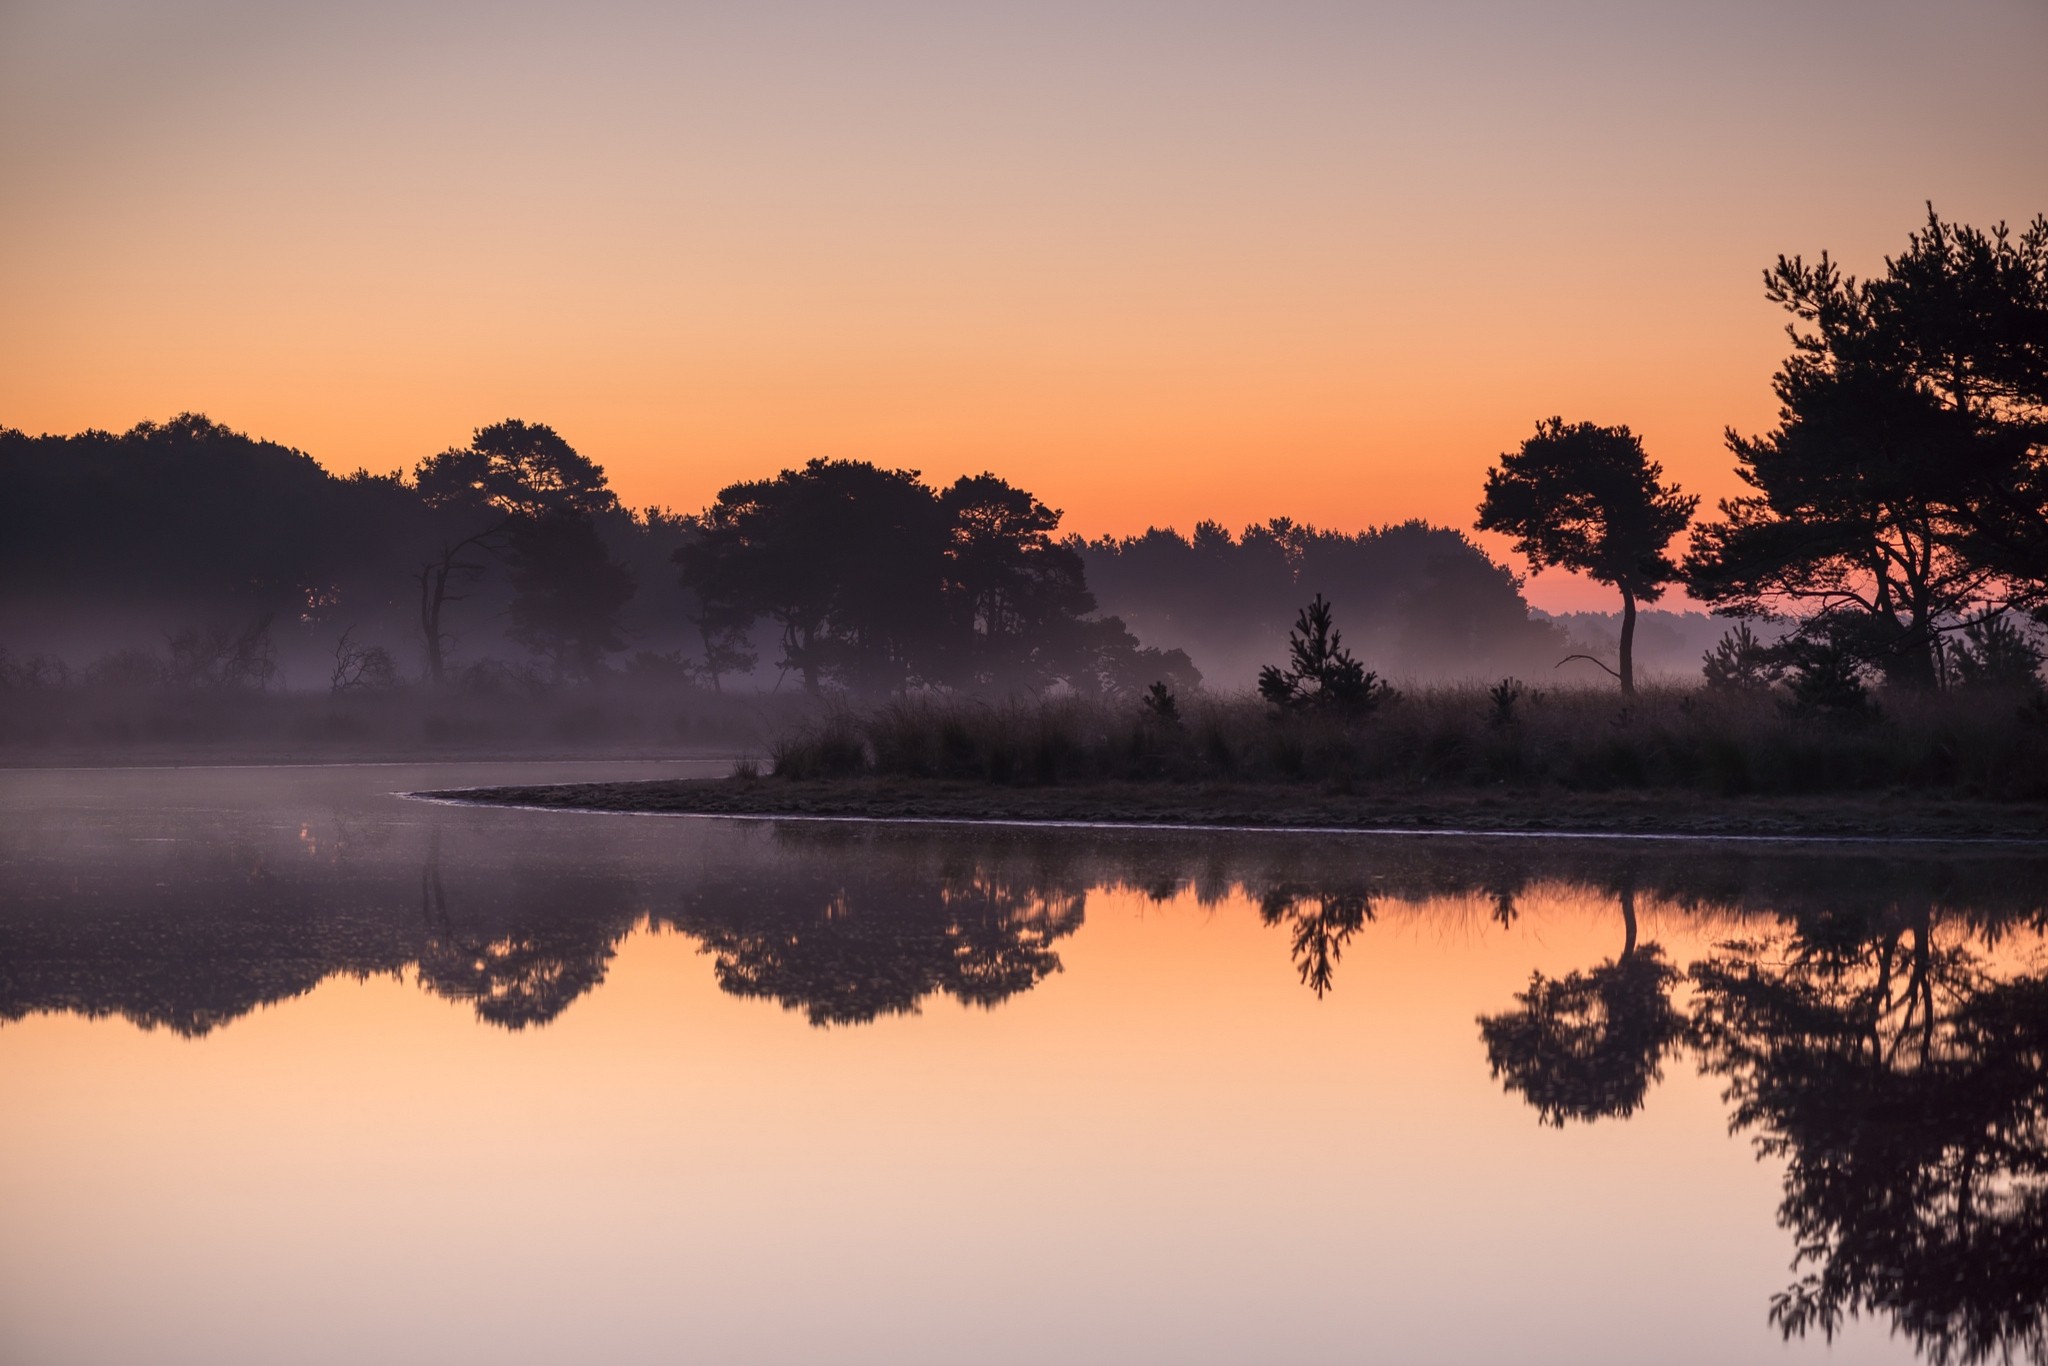 General 2048x1366 nature landscape lake mist trees water reflection forest calm Netherlands sunrise calm waters